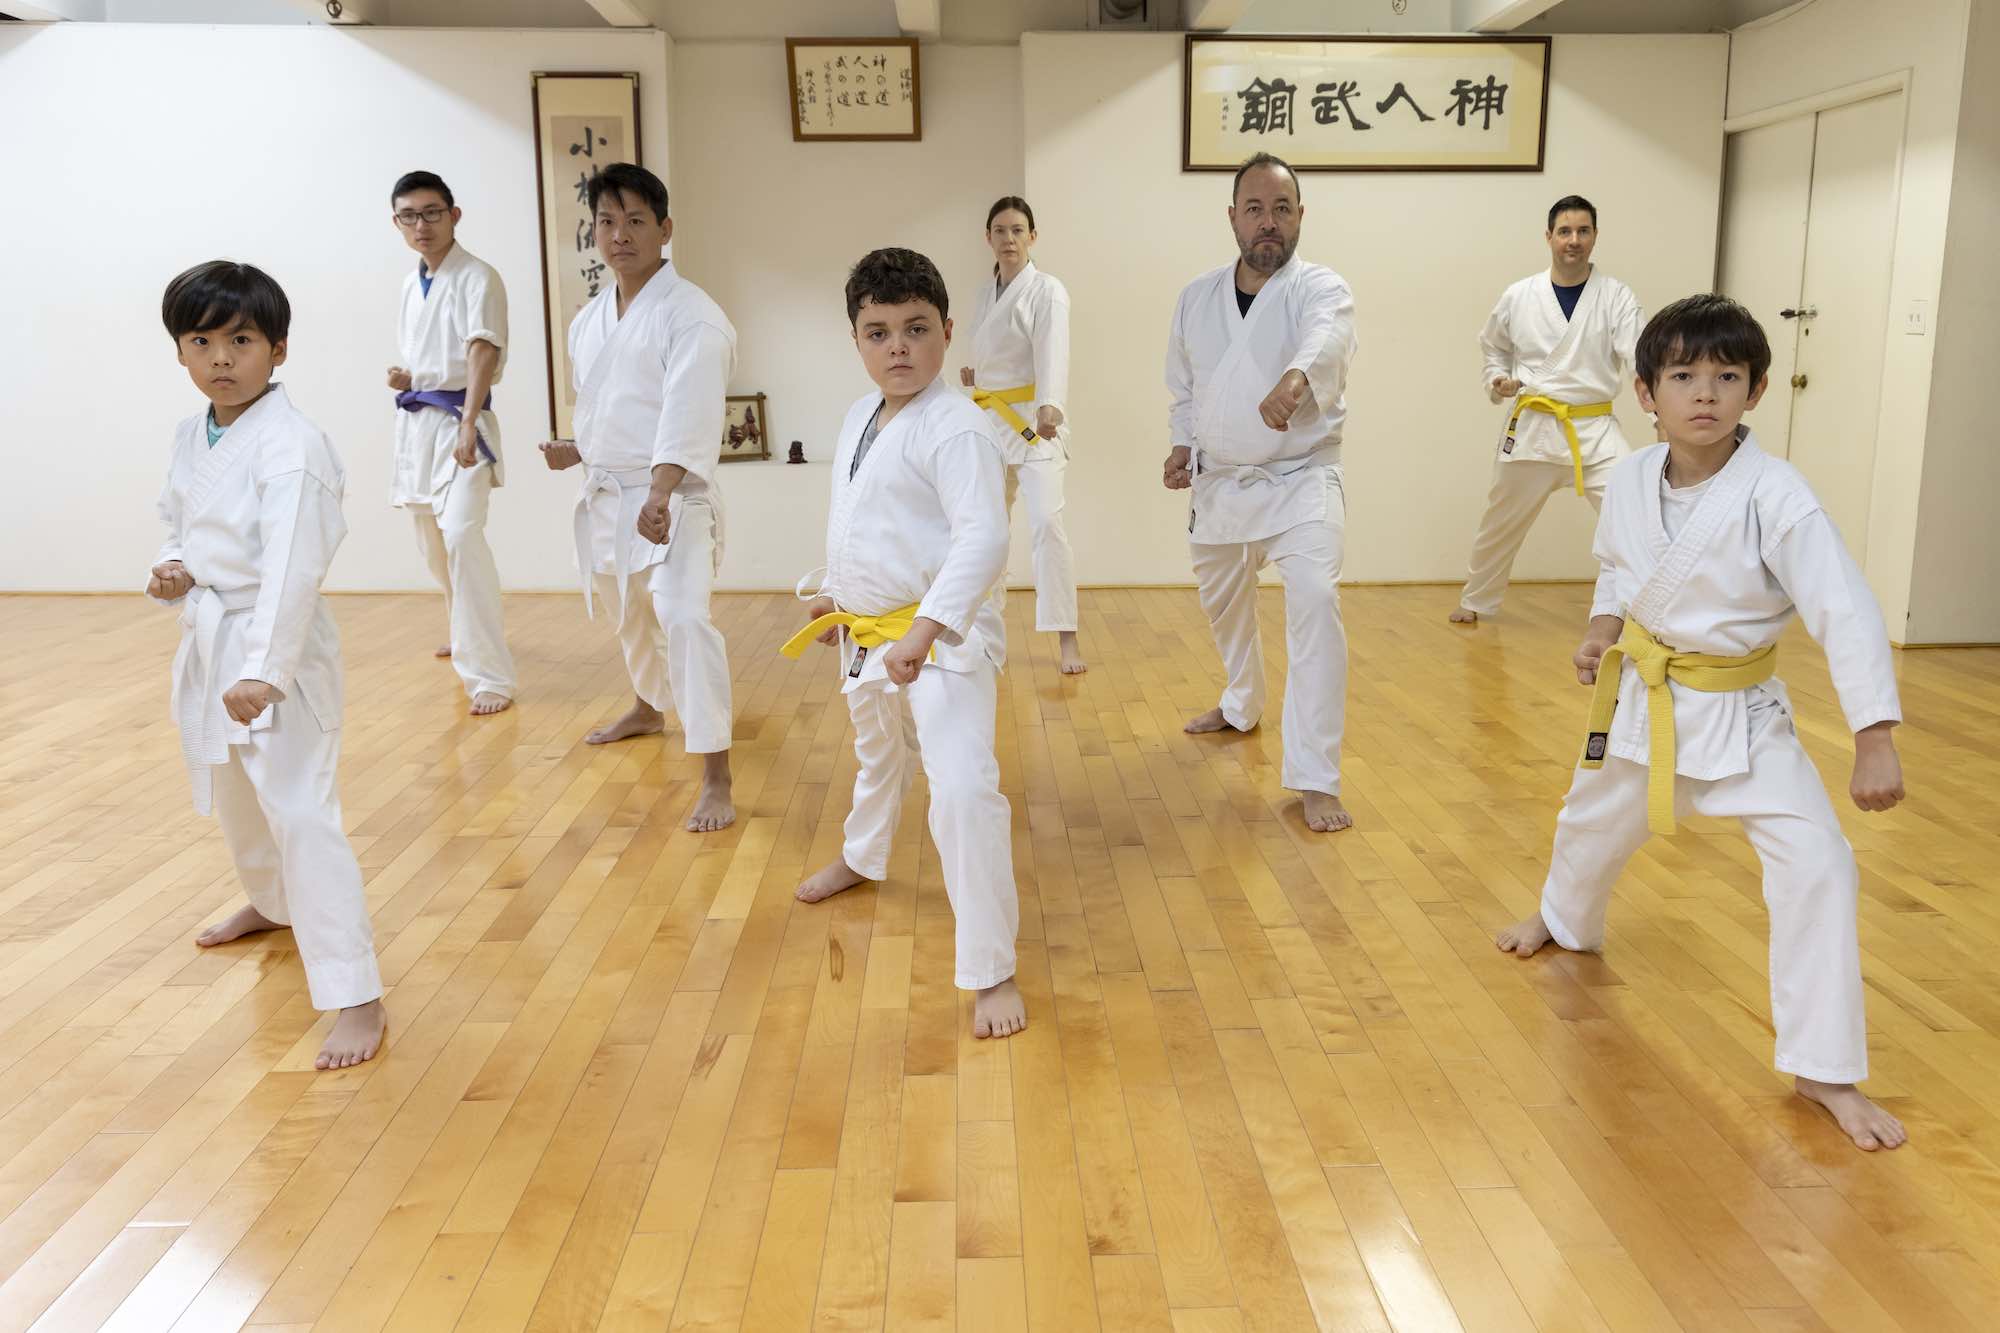 Kids and parents training blocks in the dojo